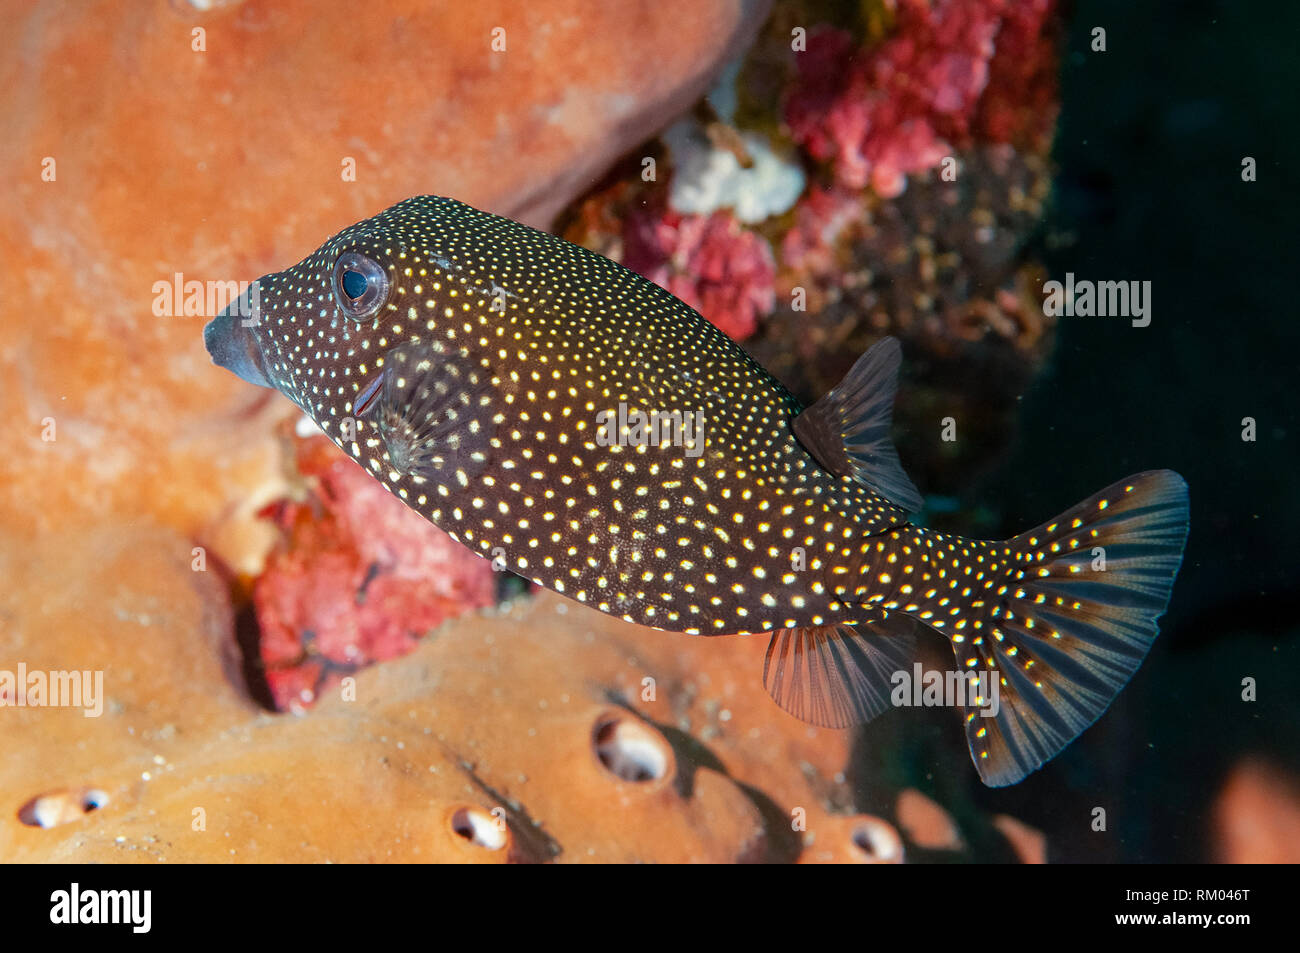 Spotted Boxfish, Ostracion meleagris, juvenile, Pyramids dive site, Amed, east Bali, Indonesia, Indian Ocean Stock Photo